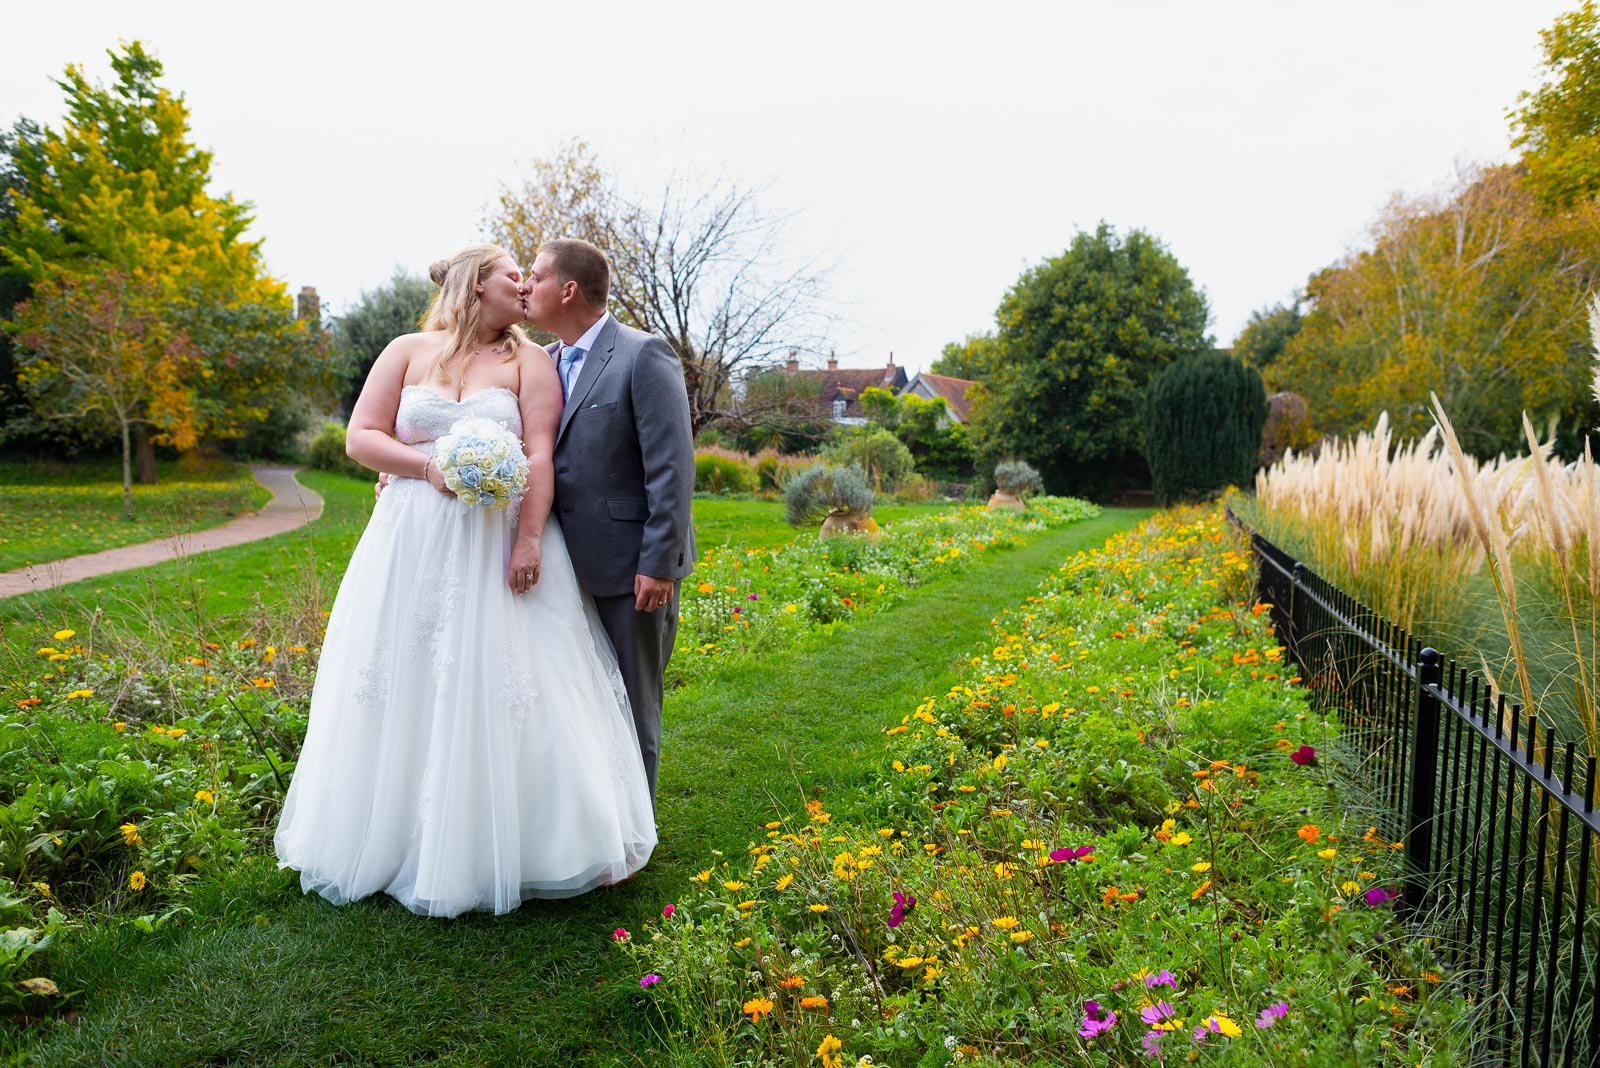 Wedding Photographer for Eliana and Jacob at Lewes Registry Office